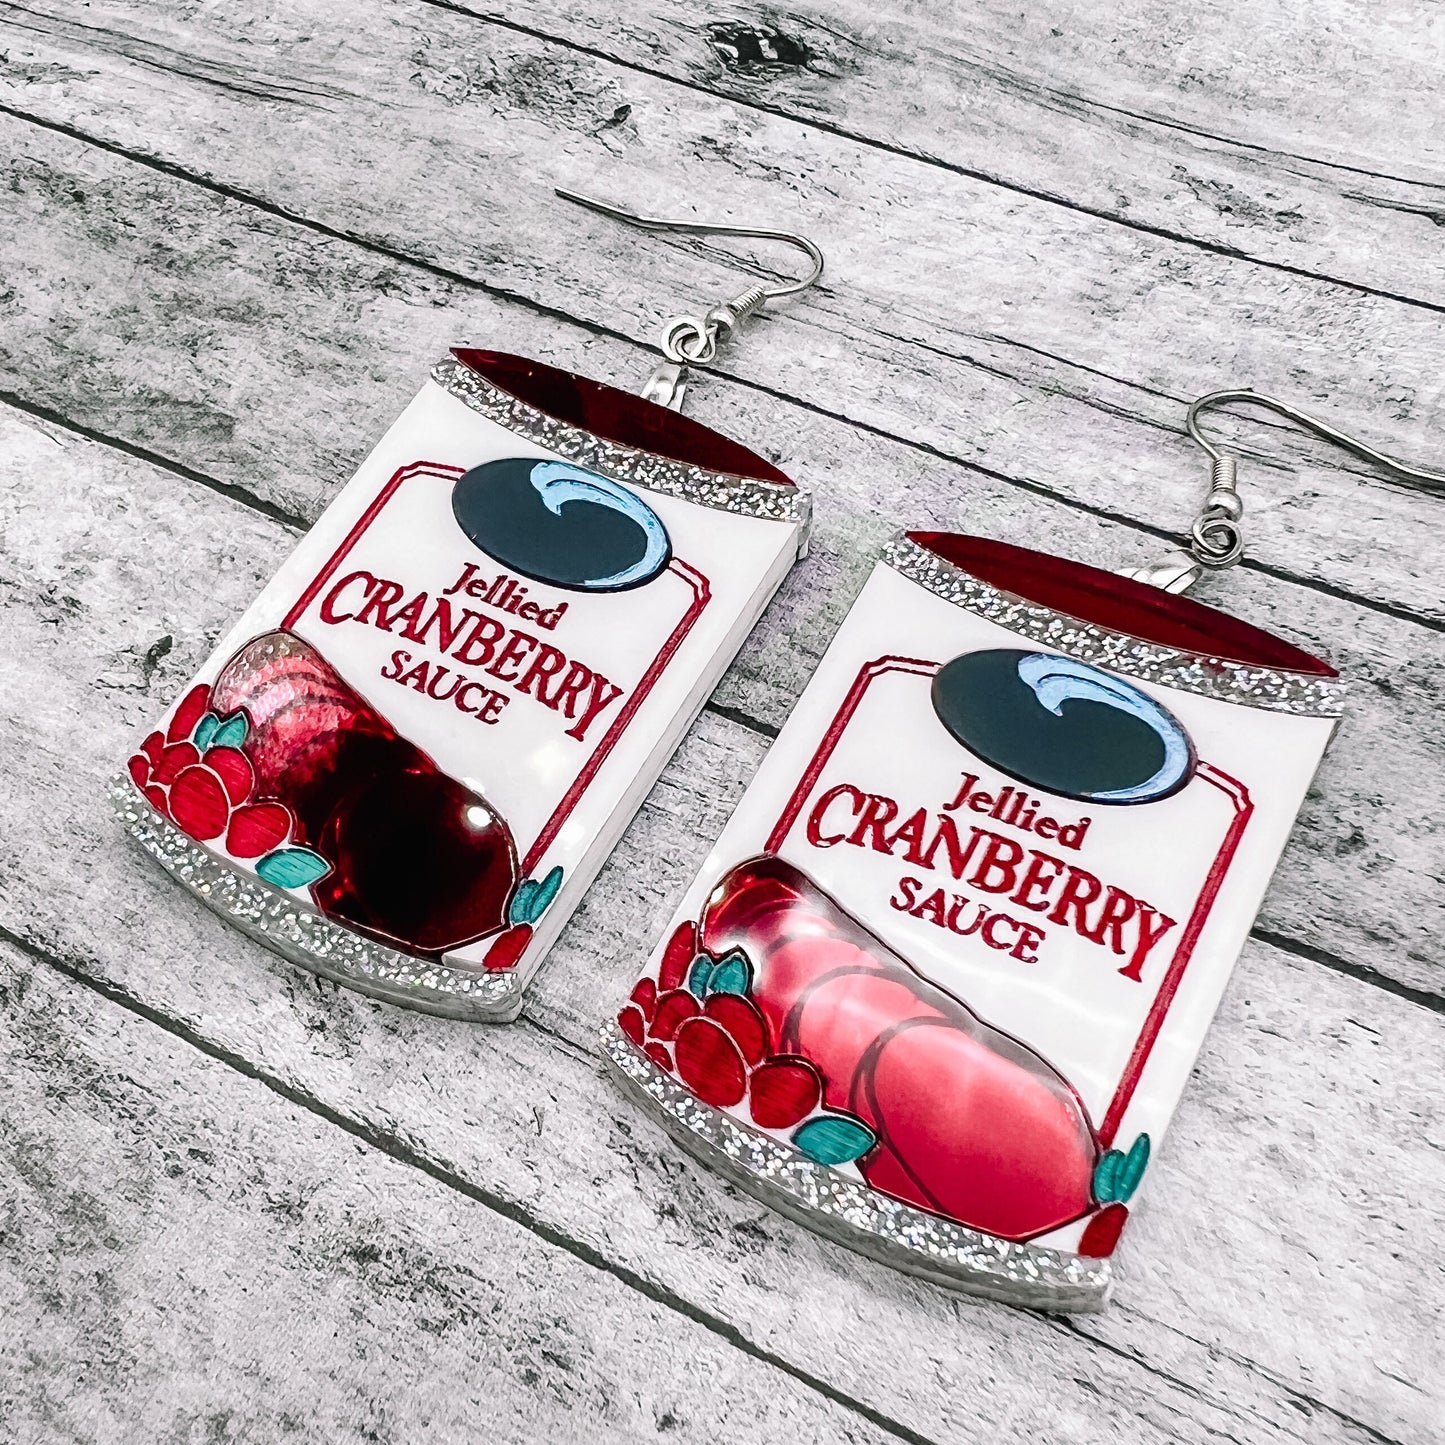 Cranberry Sauce Earrings